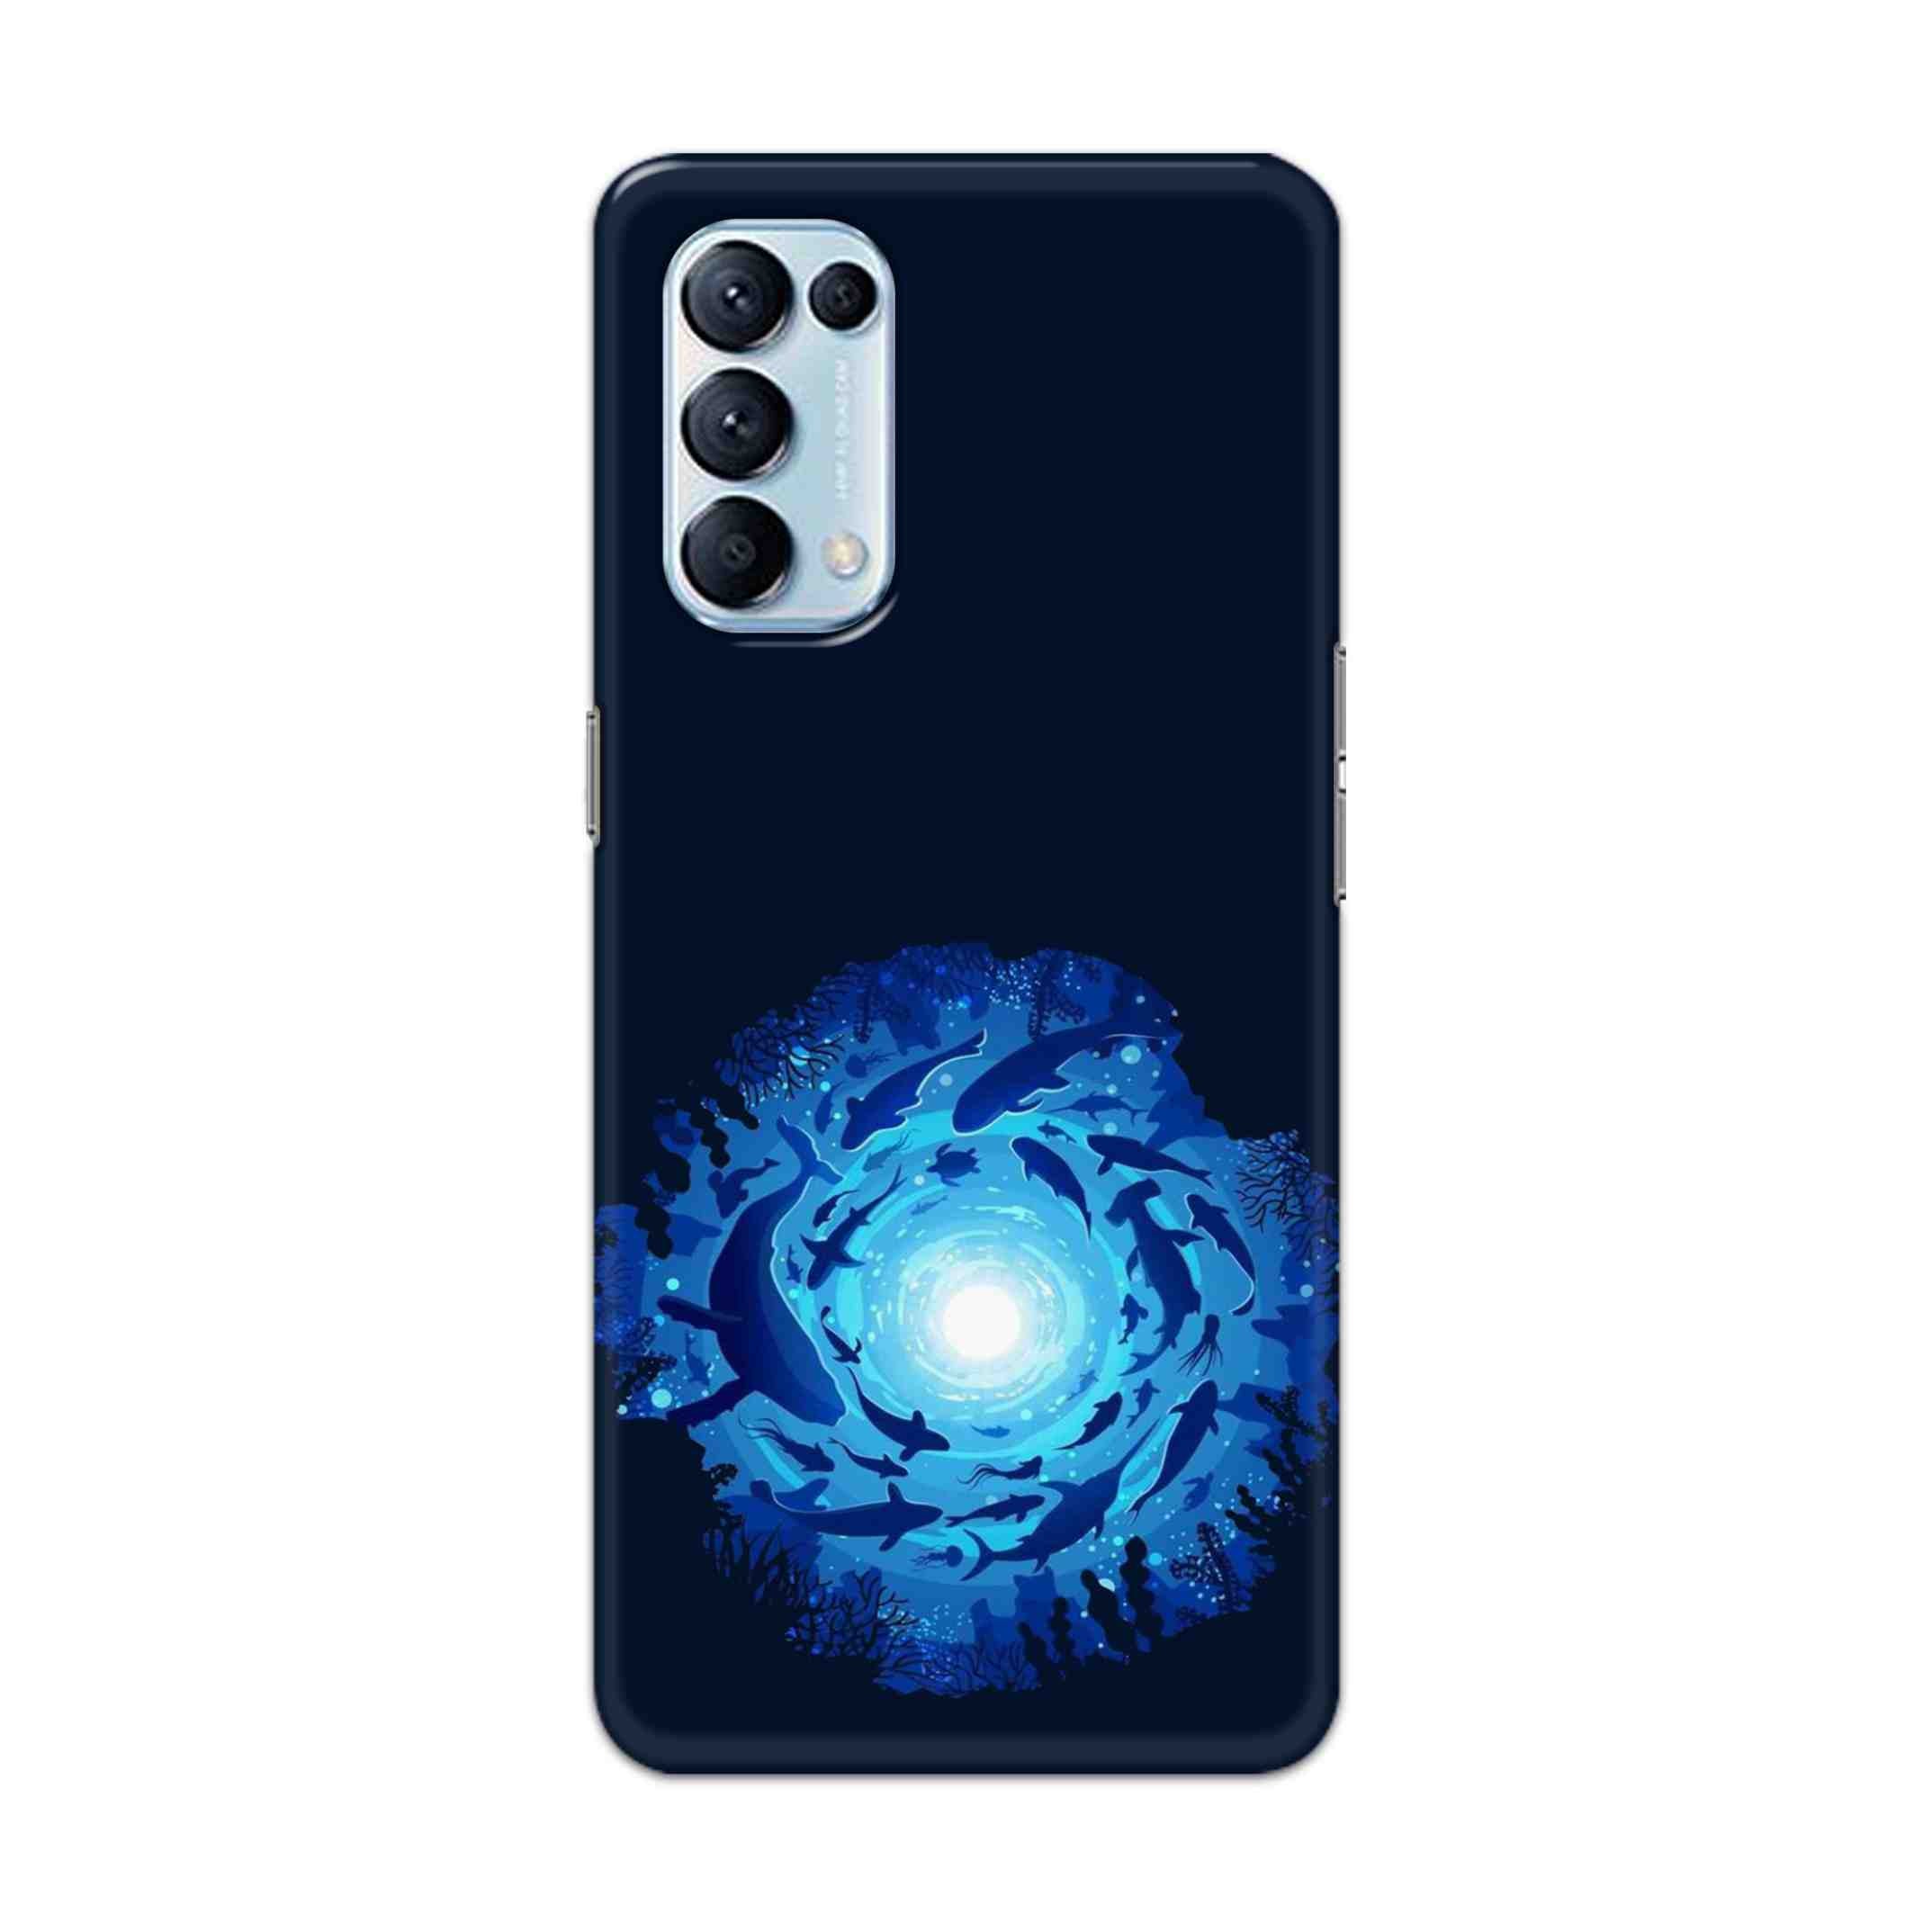 Buy Blue Whale Hard Back Mobile Phone Case Cover For Oppo Reno 5 Pro 5G Online